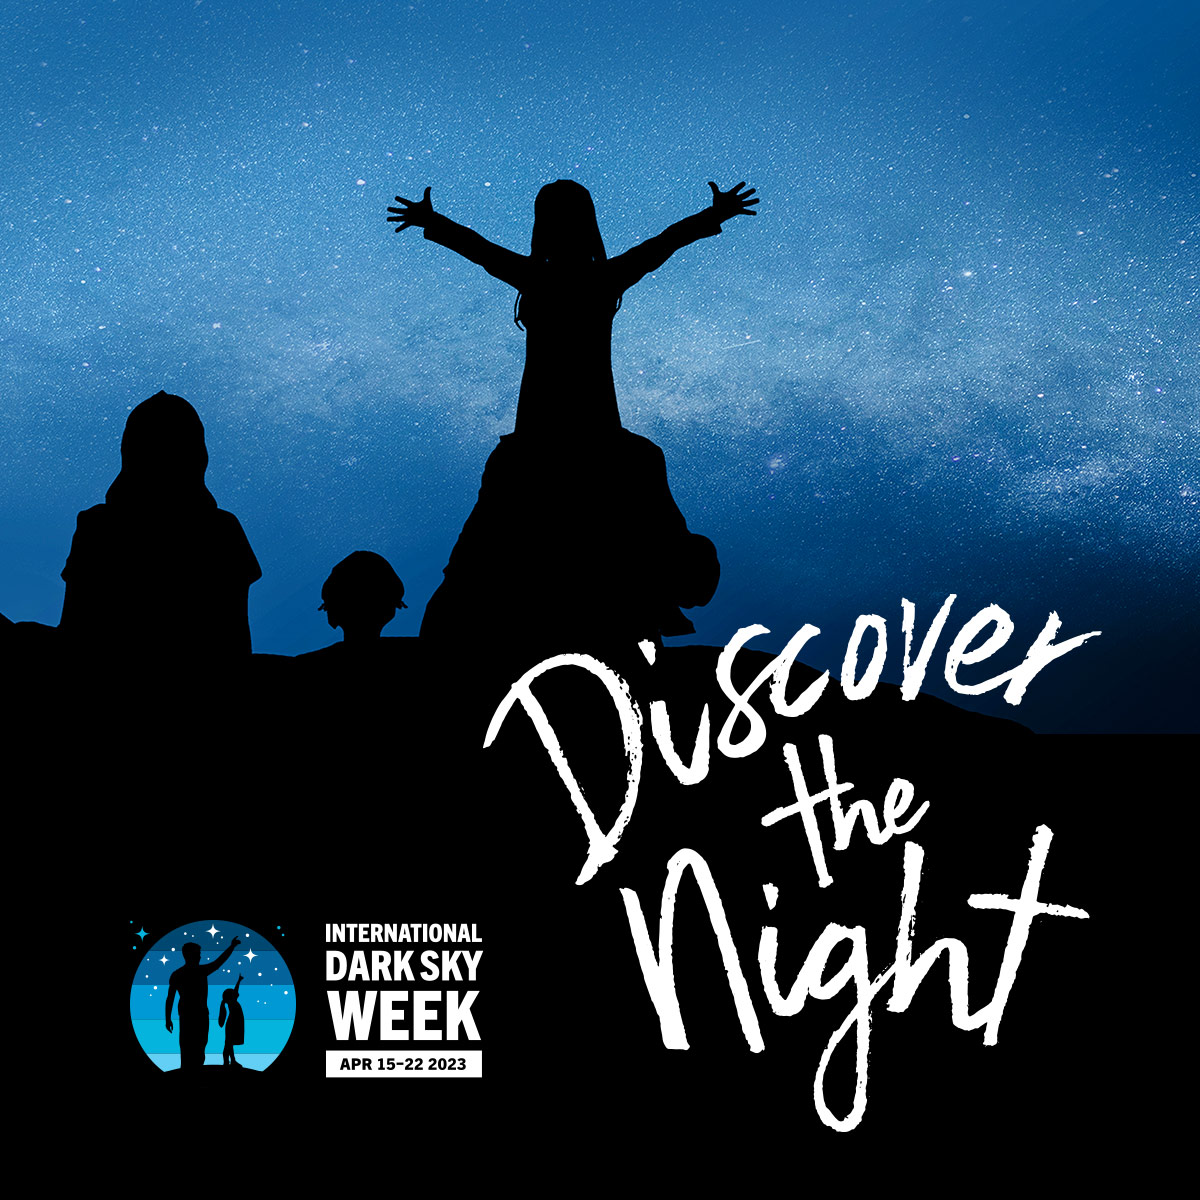 Happy International Dark Sky Week! This annual celebration raises awareness around the harms of light pollution and promotes the preservation of dark skies.

#DiscovertheNight by stepping out for a night walk, listen for nocturnal animals, or simply look up and enjoy the stars.